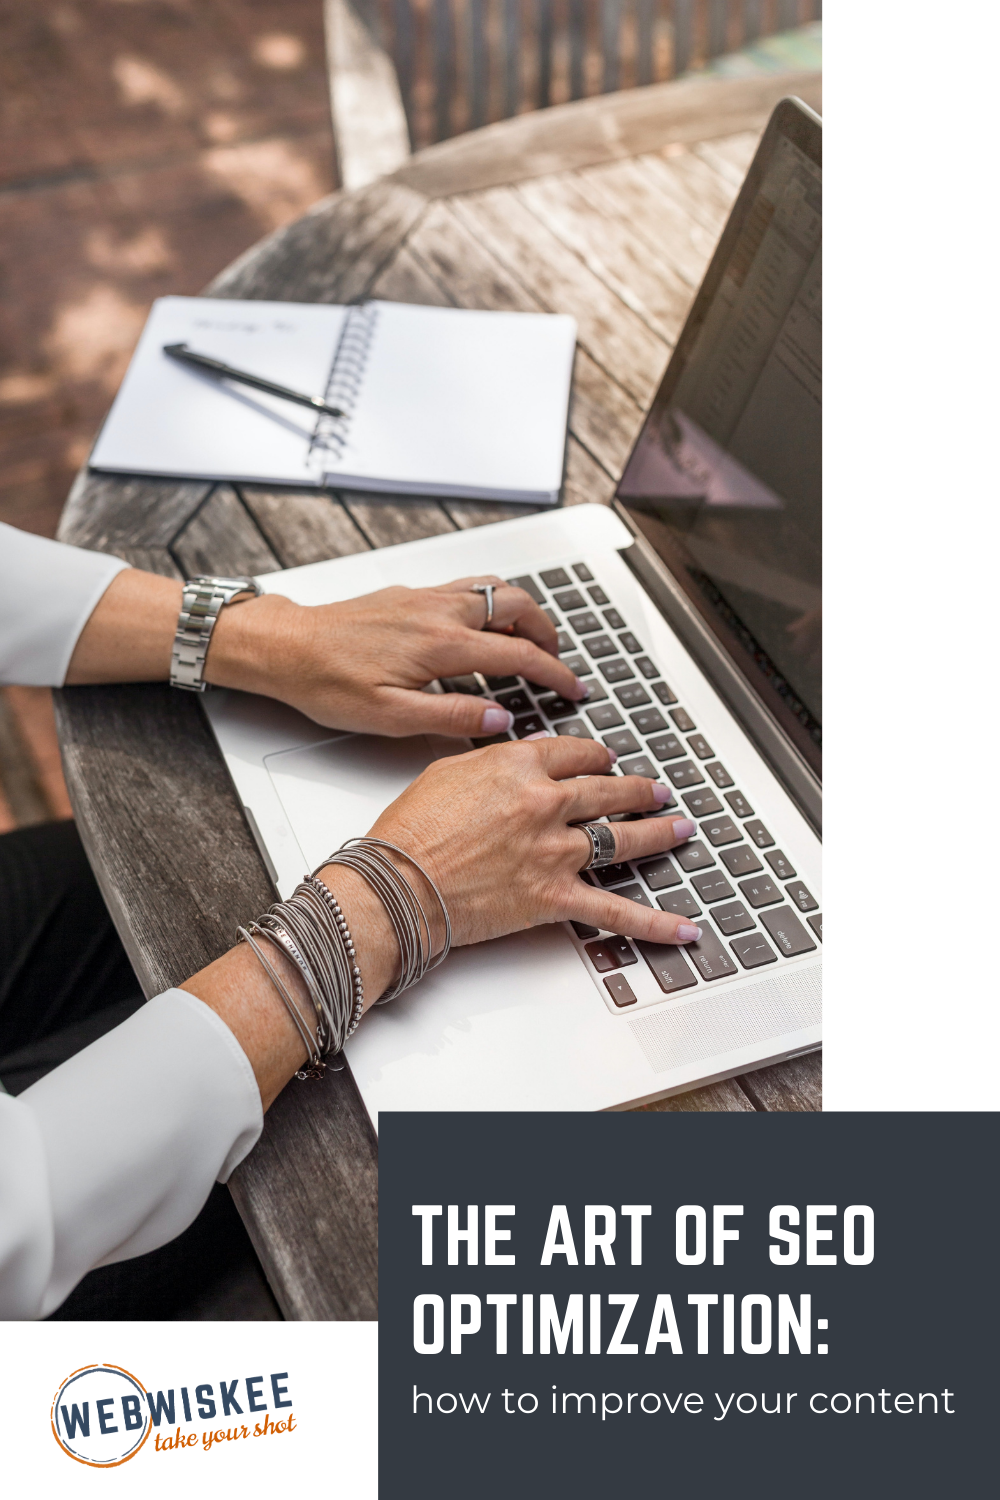 The art of SEO optimization: how to improve your content by WebWiskee